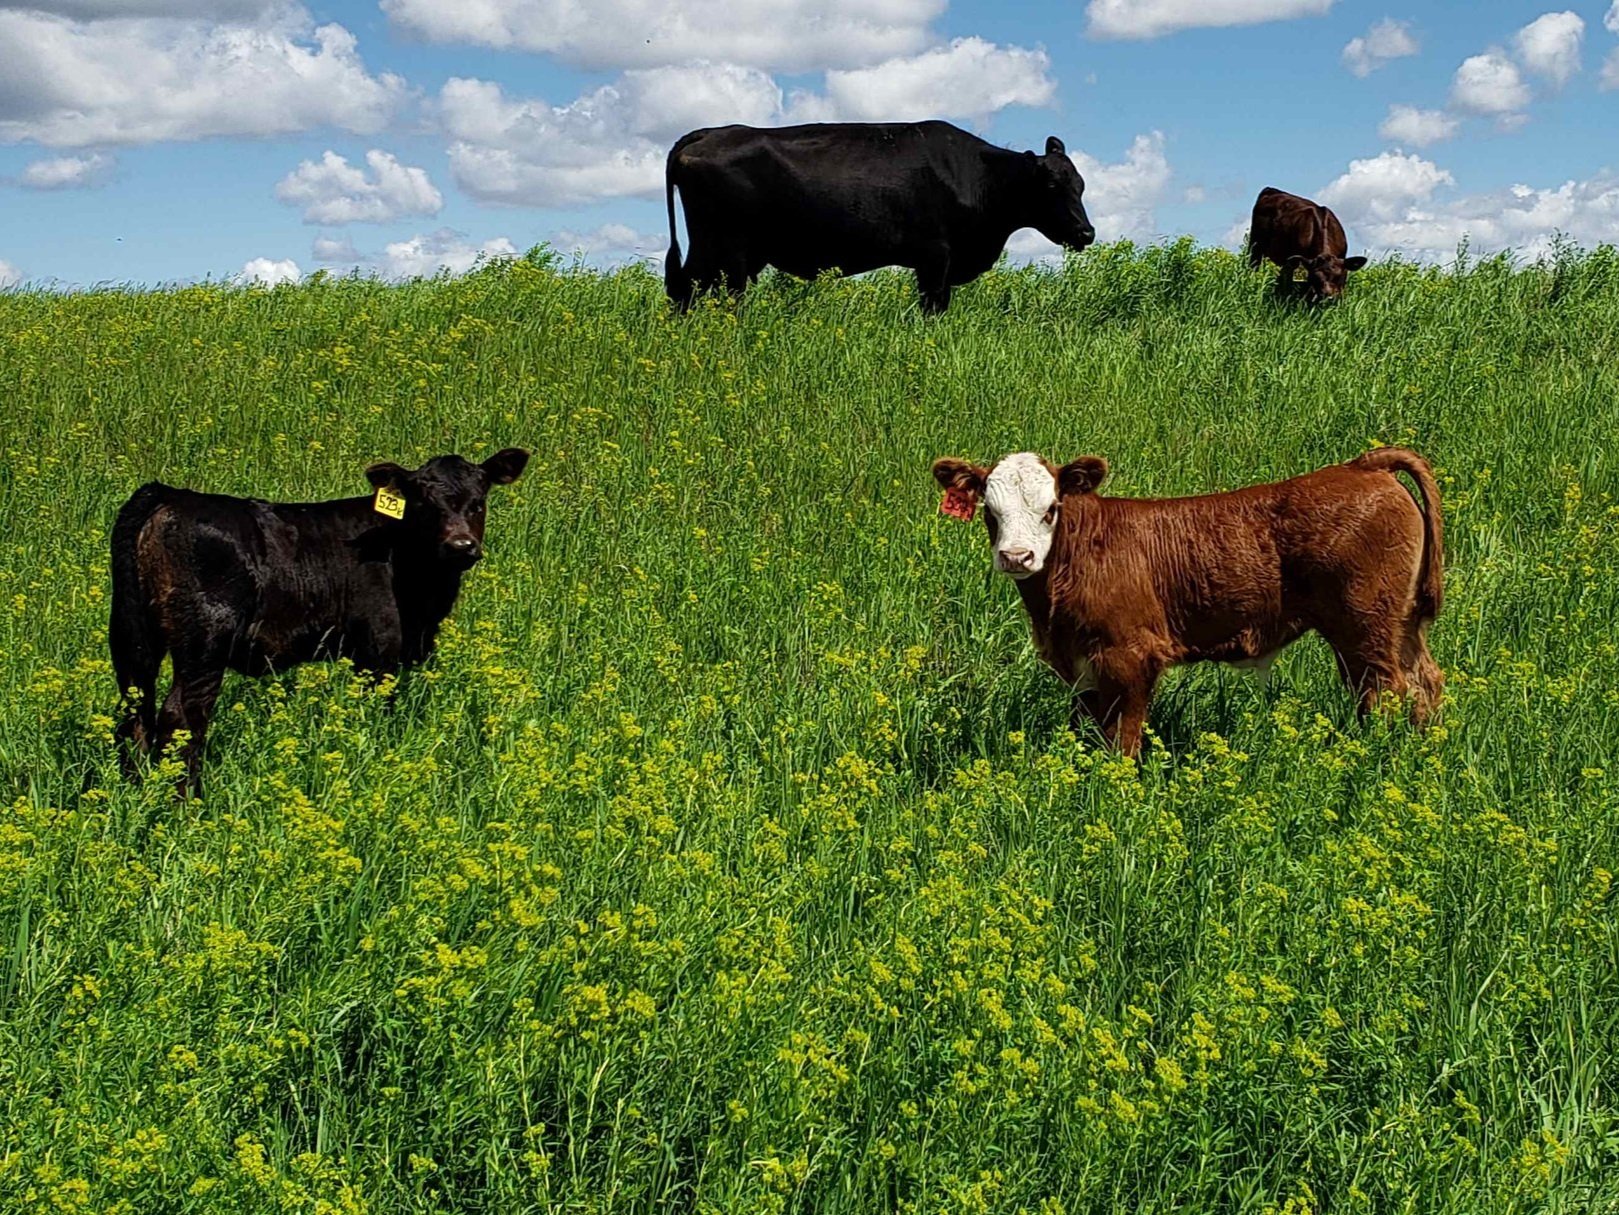 Calves grazing in multi-day treatment. Leafy spurge is abundant in both grazing systems.